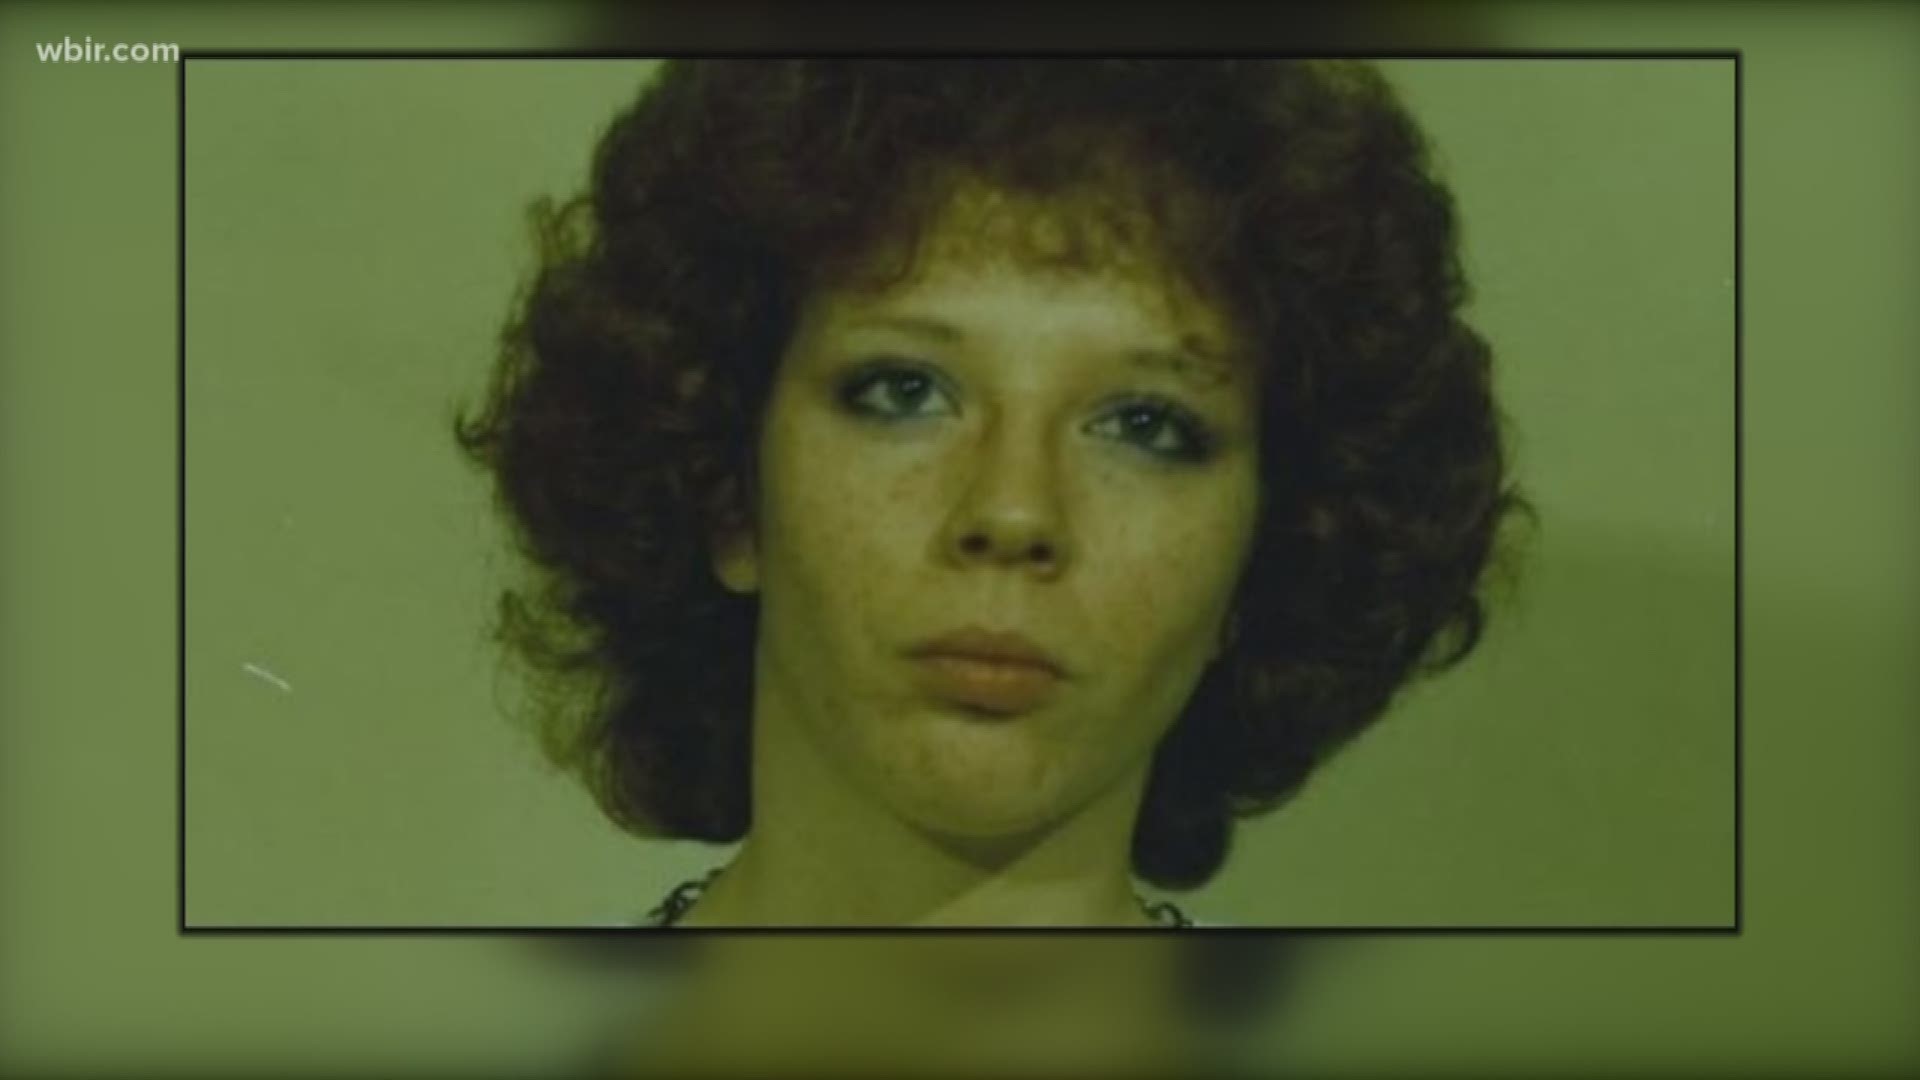 Tina Farmer was found dead along an East Tennessee interstate in 1985, but she remained missing and unidentified for more than three decades.  The suspected serial killer who murdered her and 5 other women has not been caught.